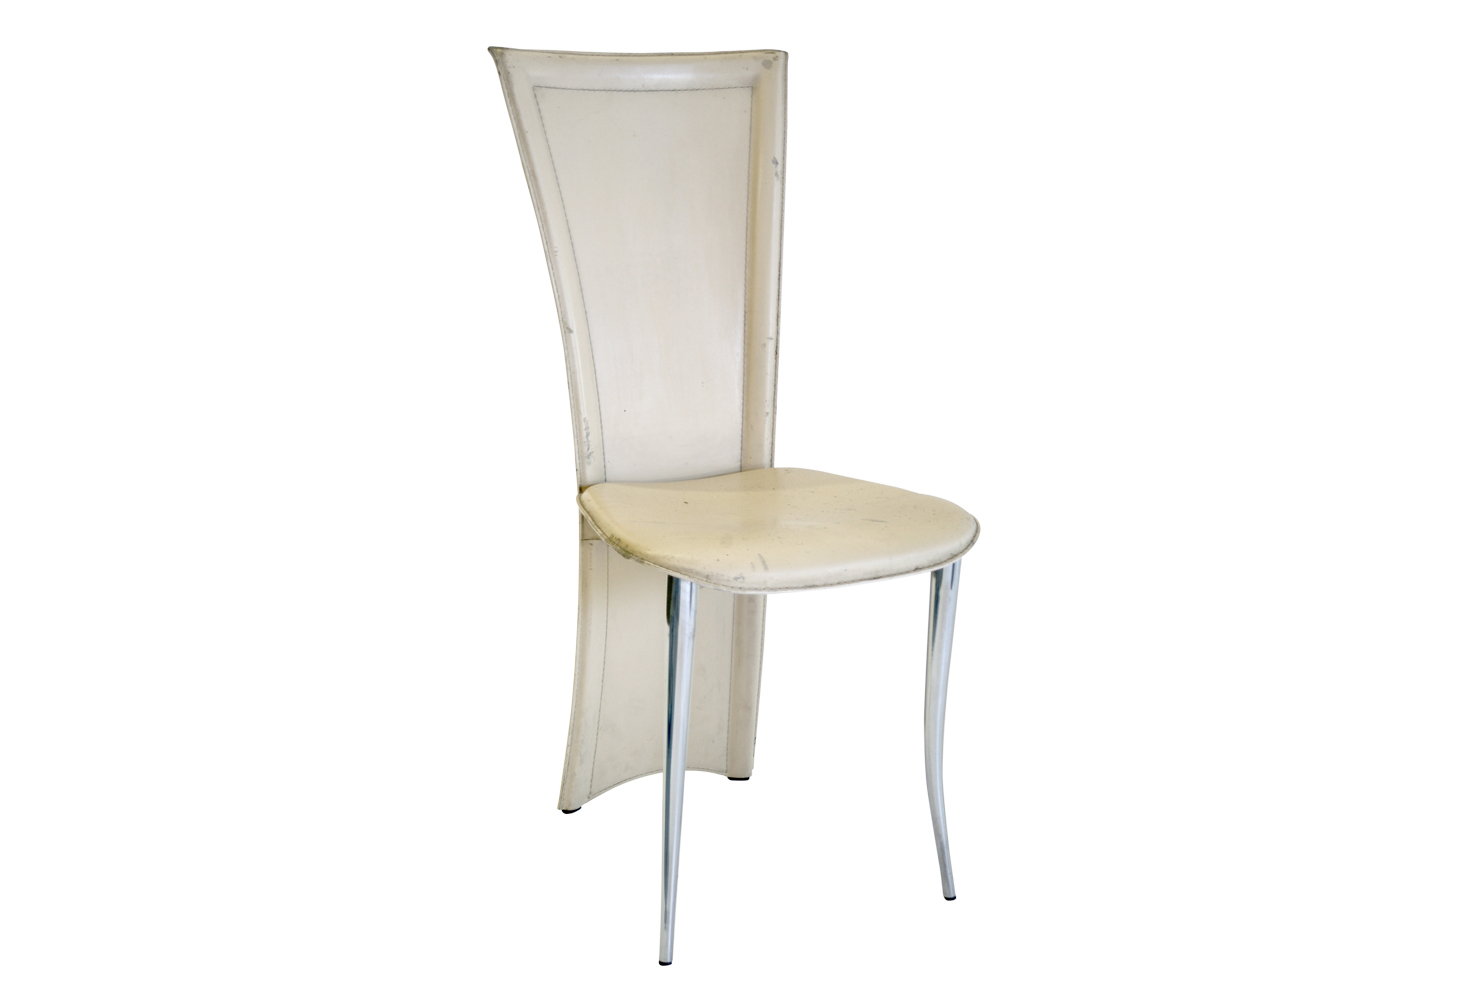 WHITE LEATHER LUXURY ITALIAN STYLE DINING CHAIR 